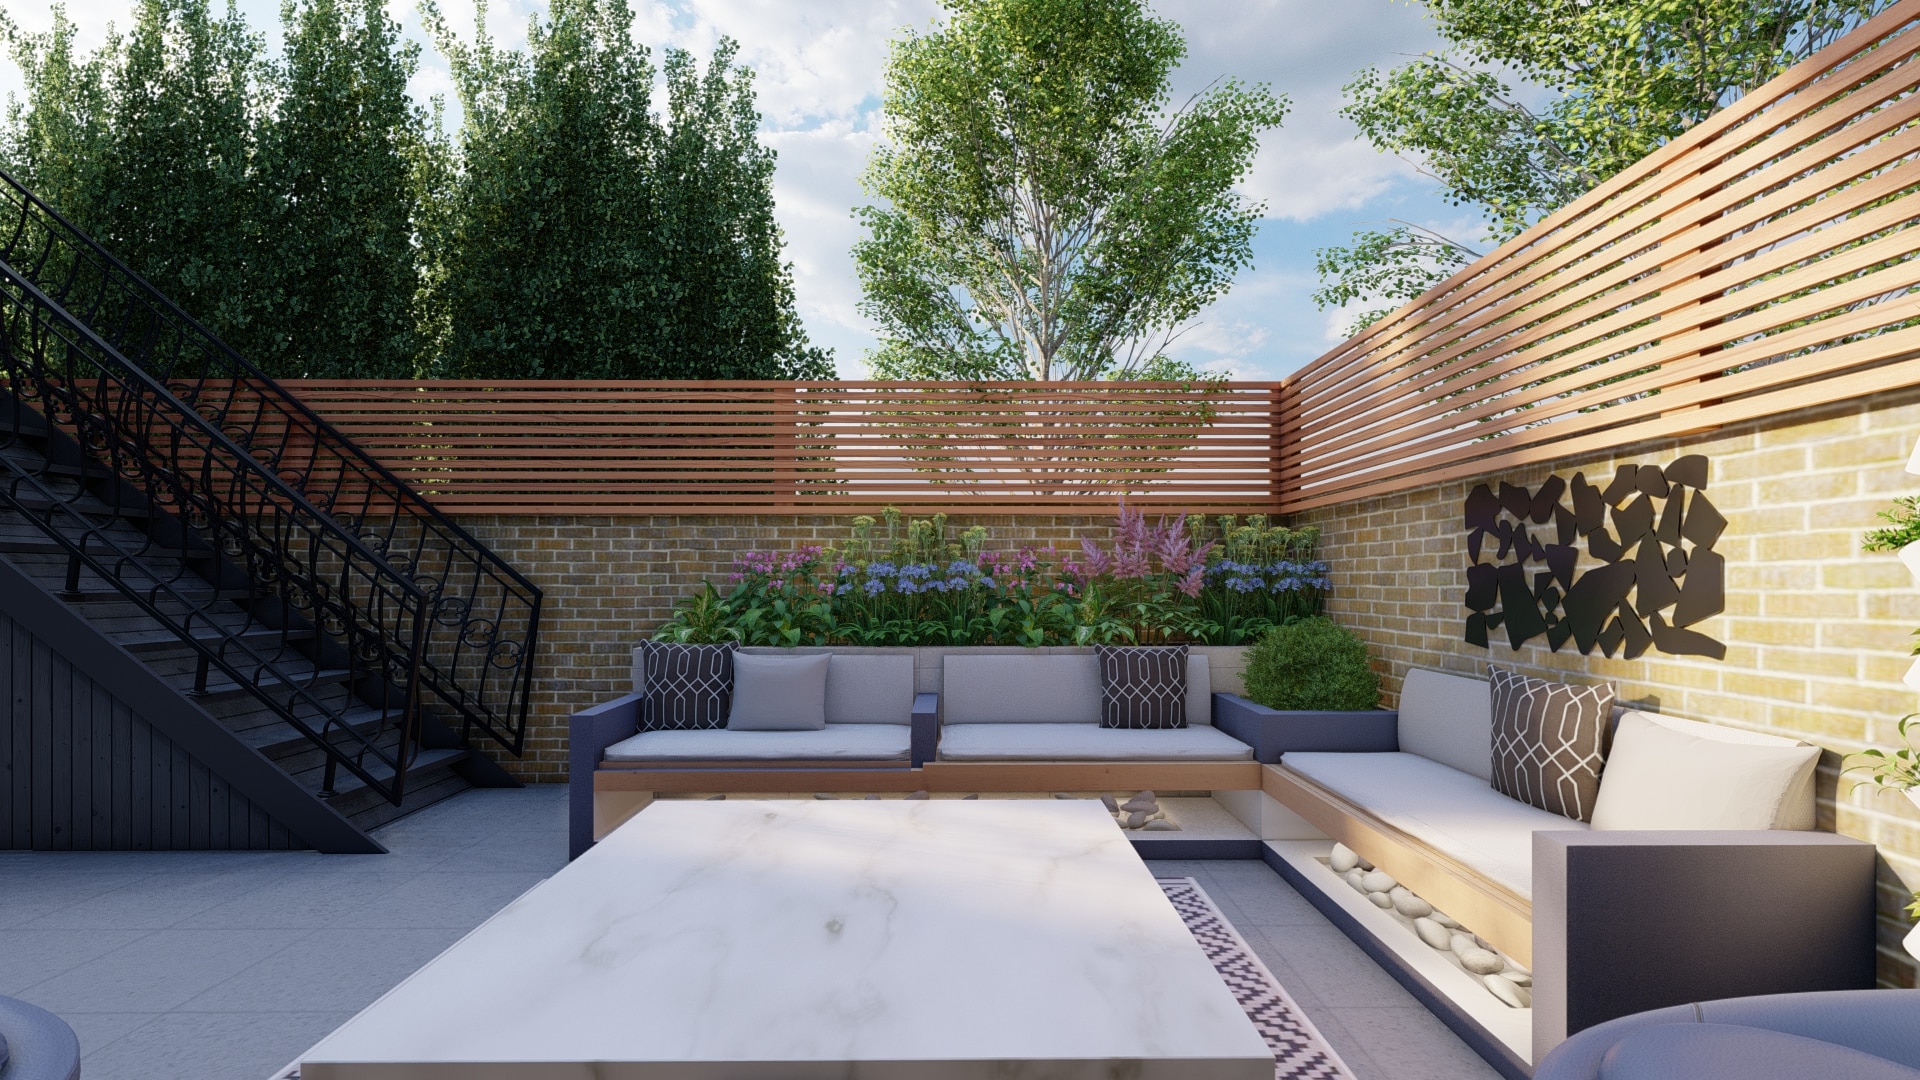 Beautiful small London courtyard garden design with Venetian fence, integrated bench and a large bespoke dining table